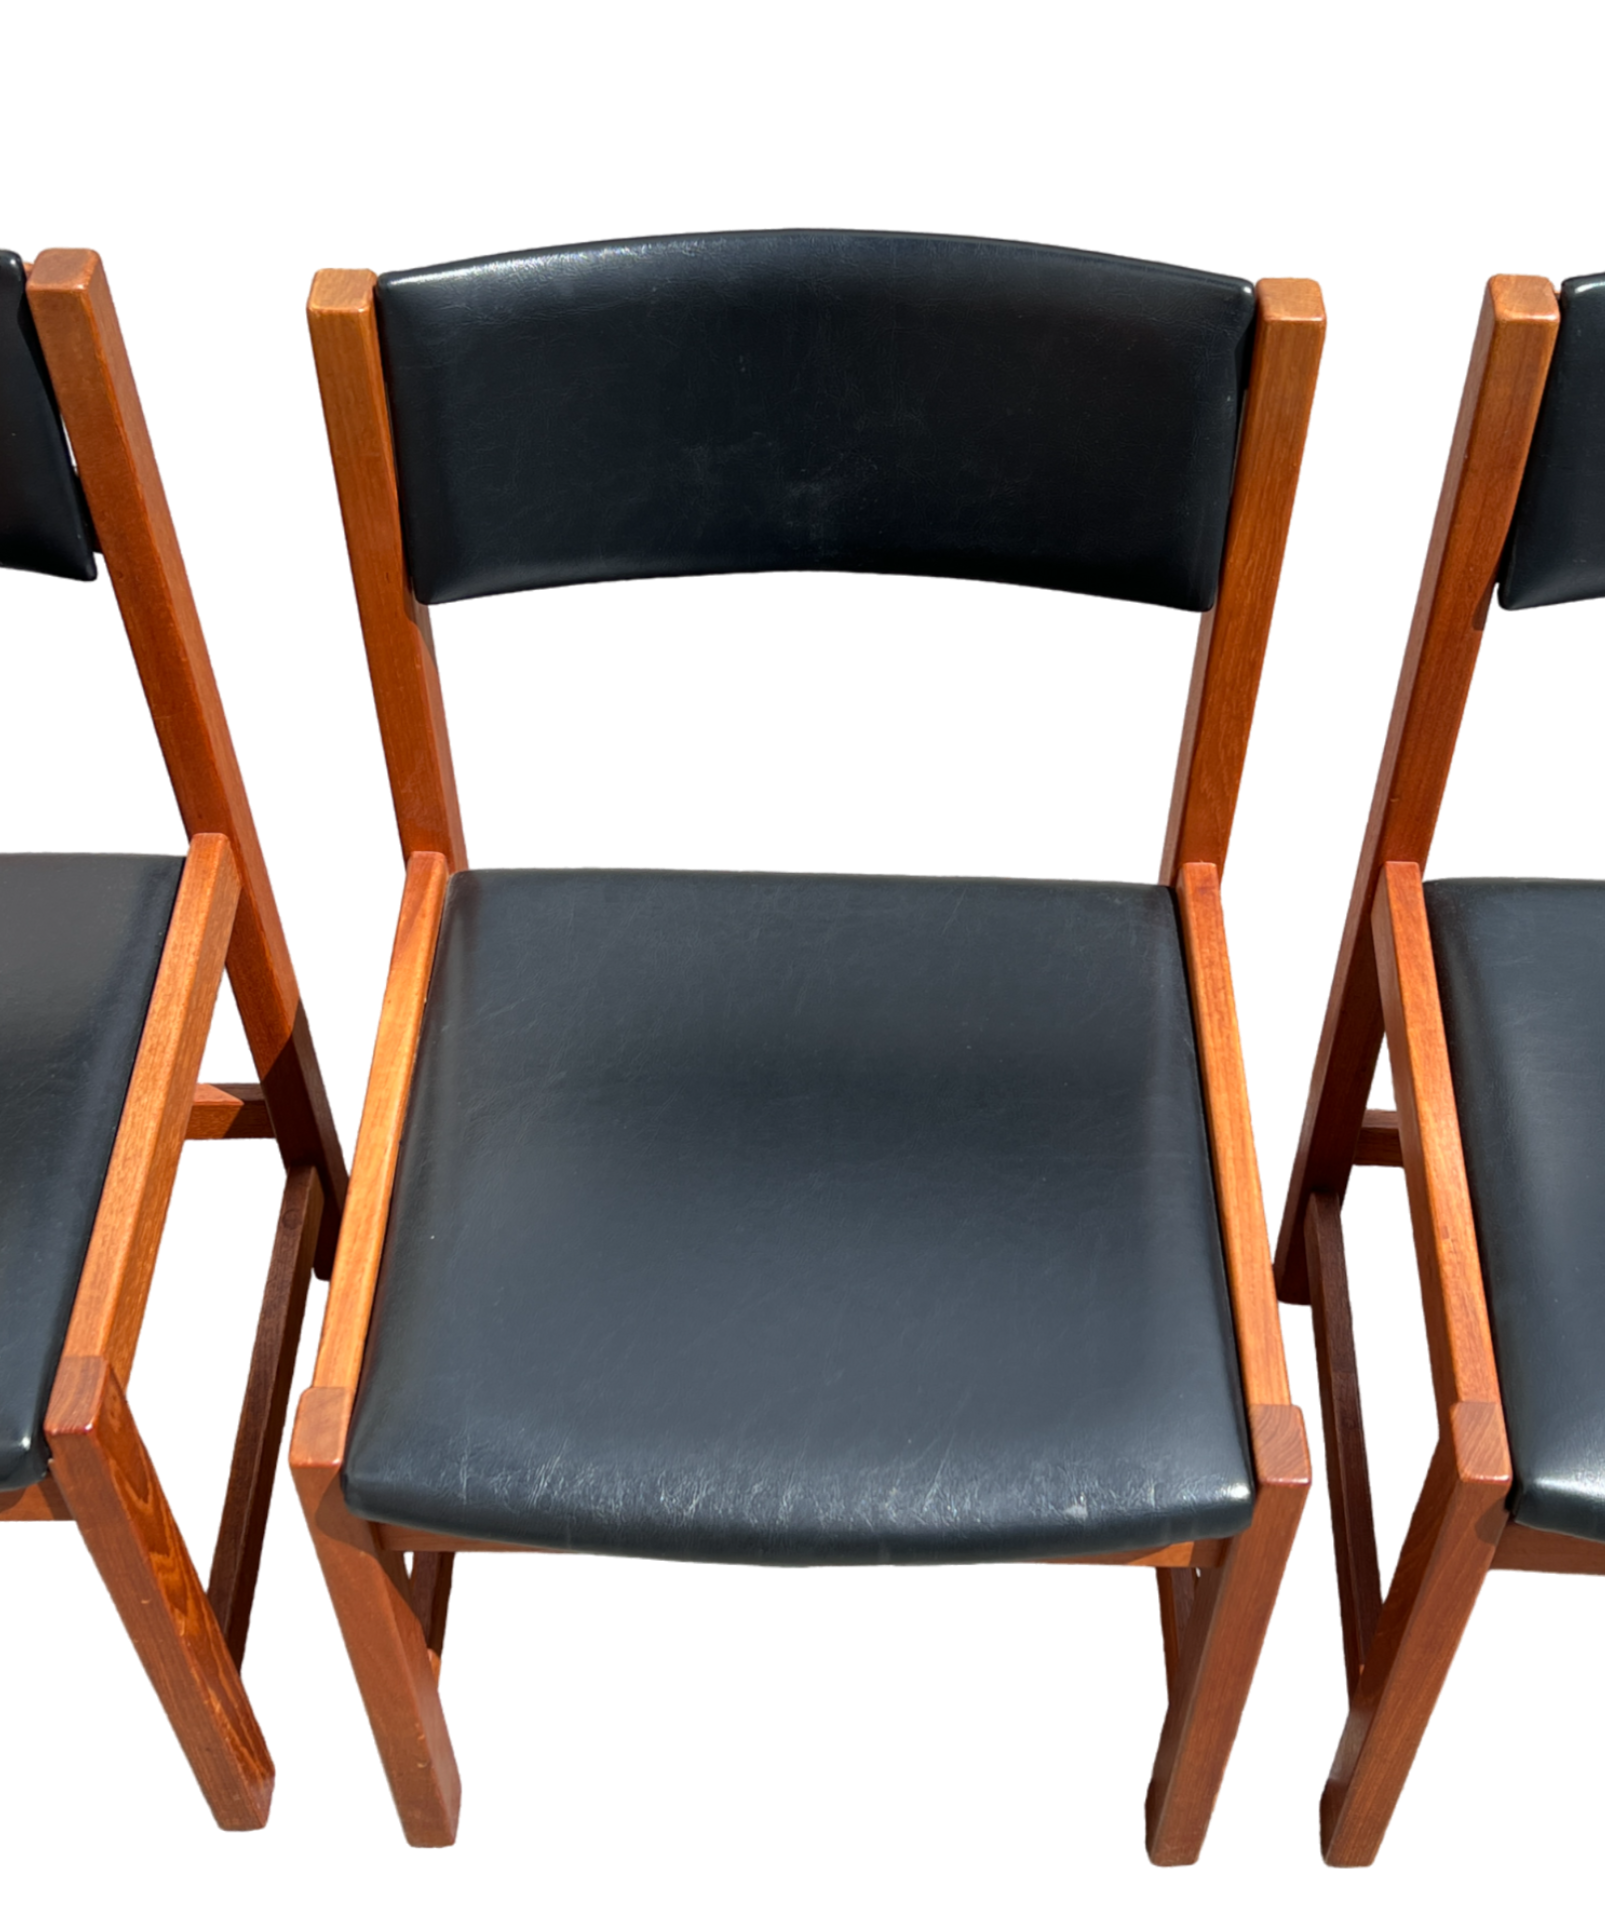 1960s Teak Dining Chairs by Ulferts, Made in Sweden